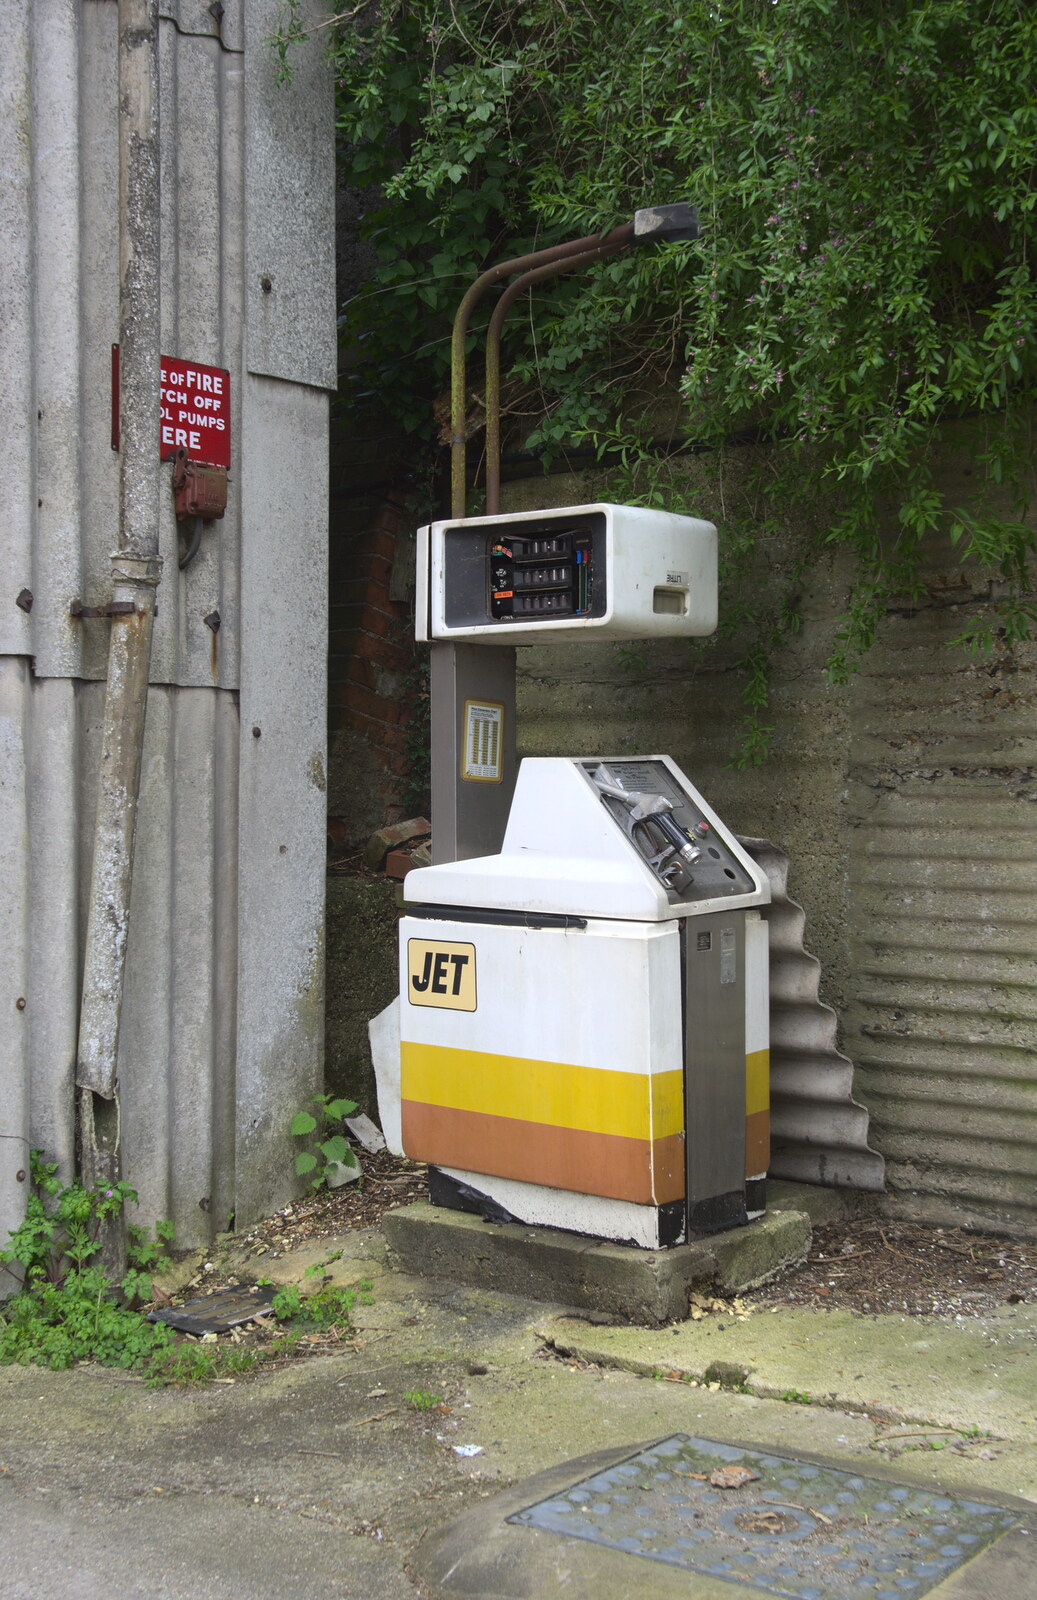 A derelict petrol pump from The BSCC Cycling Weekend, The Swan Inn, Thaxted, Essex - 12th May 2012